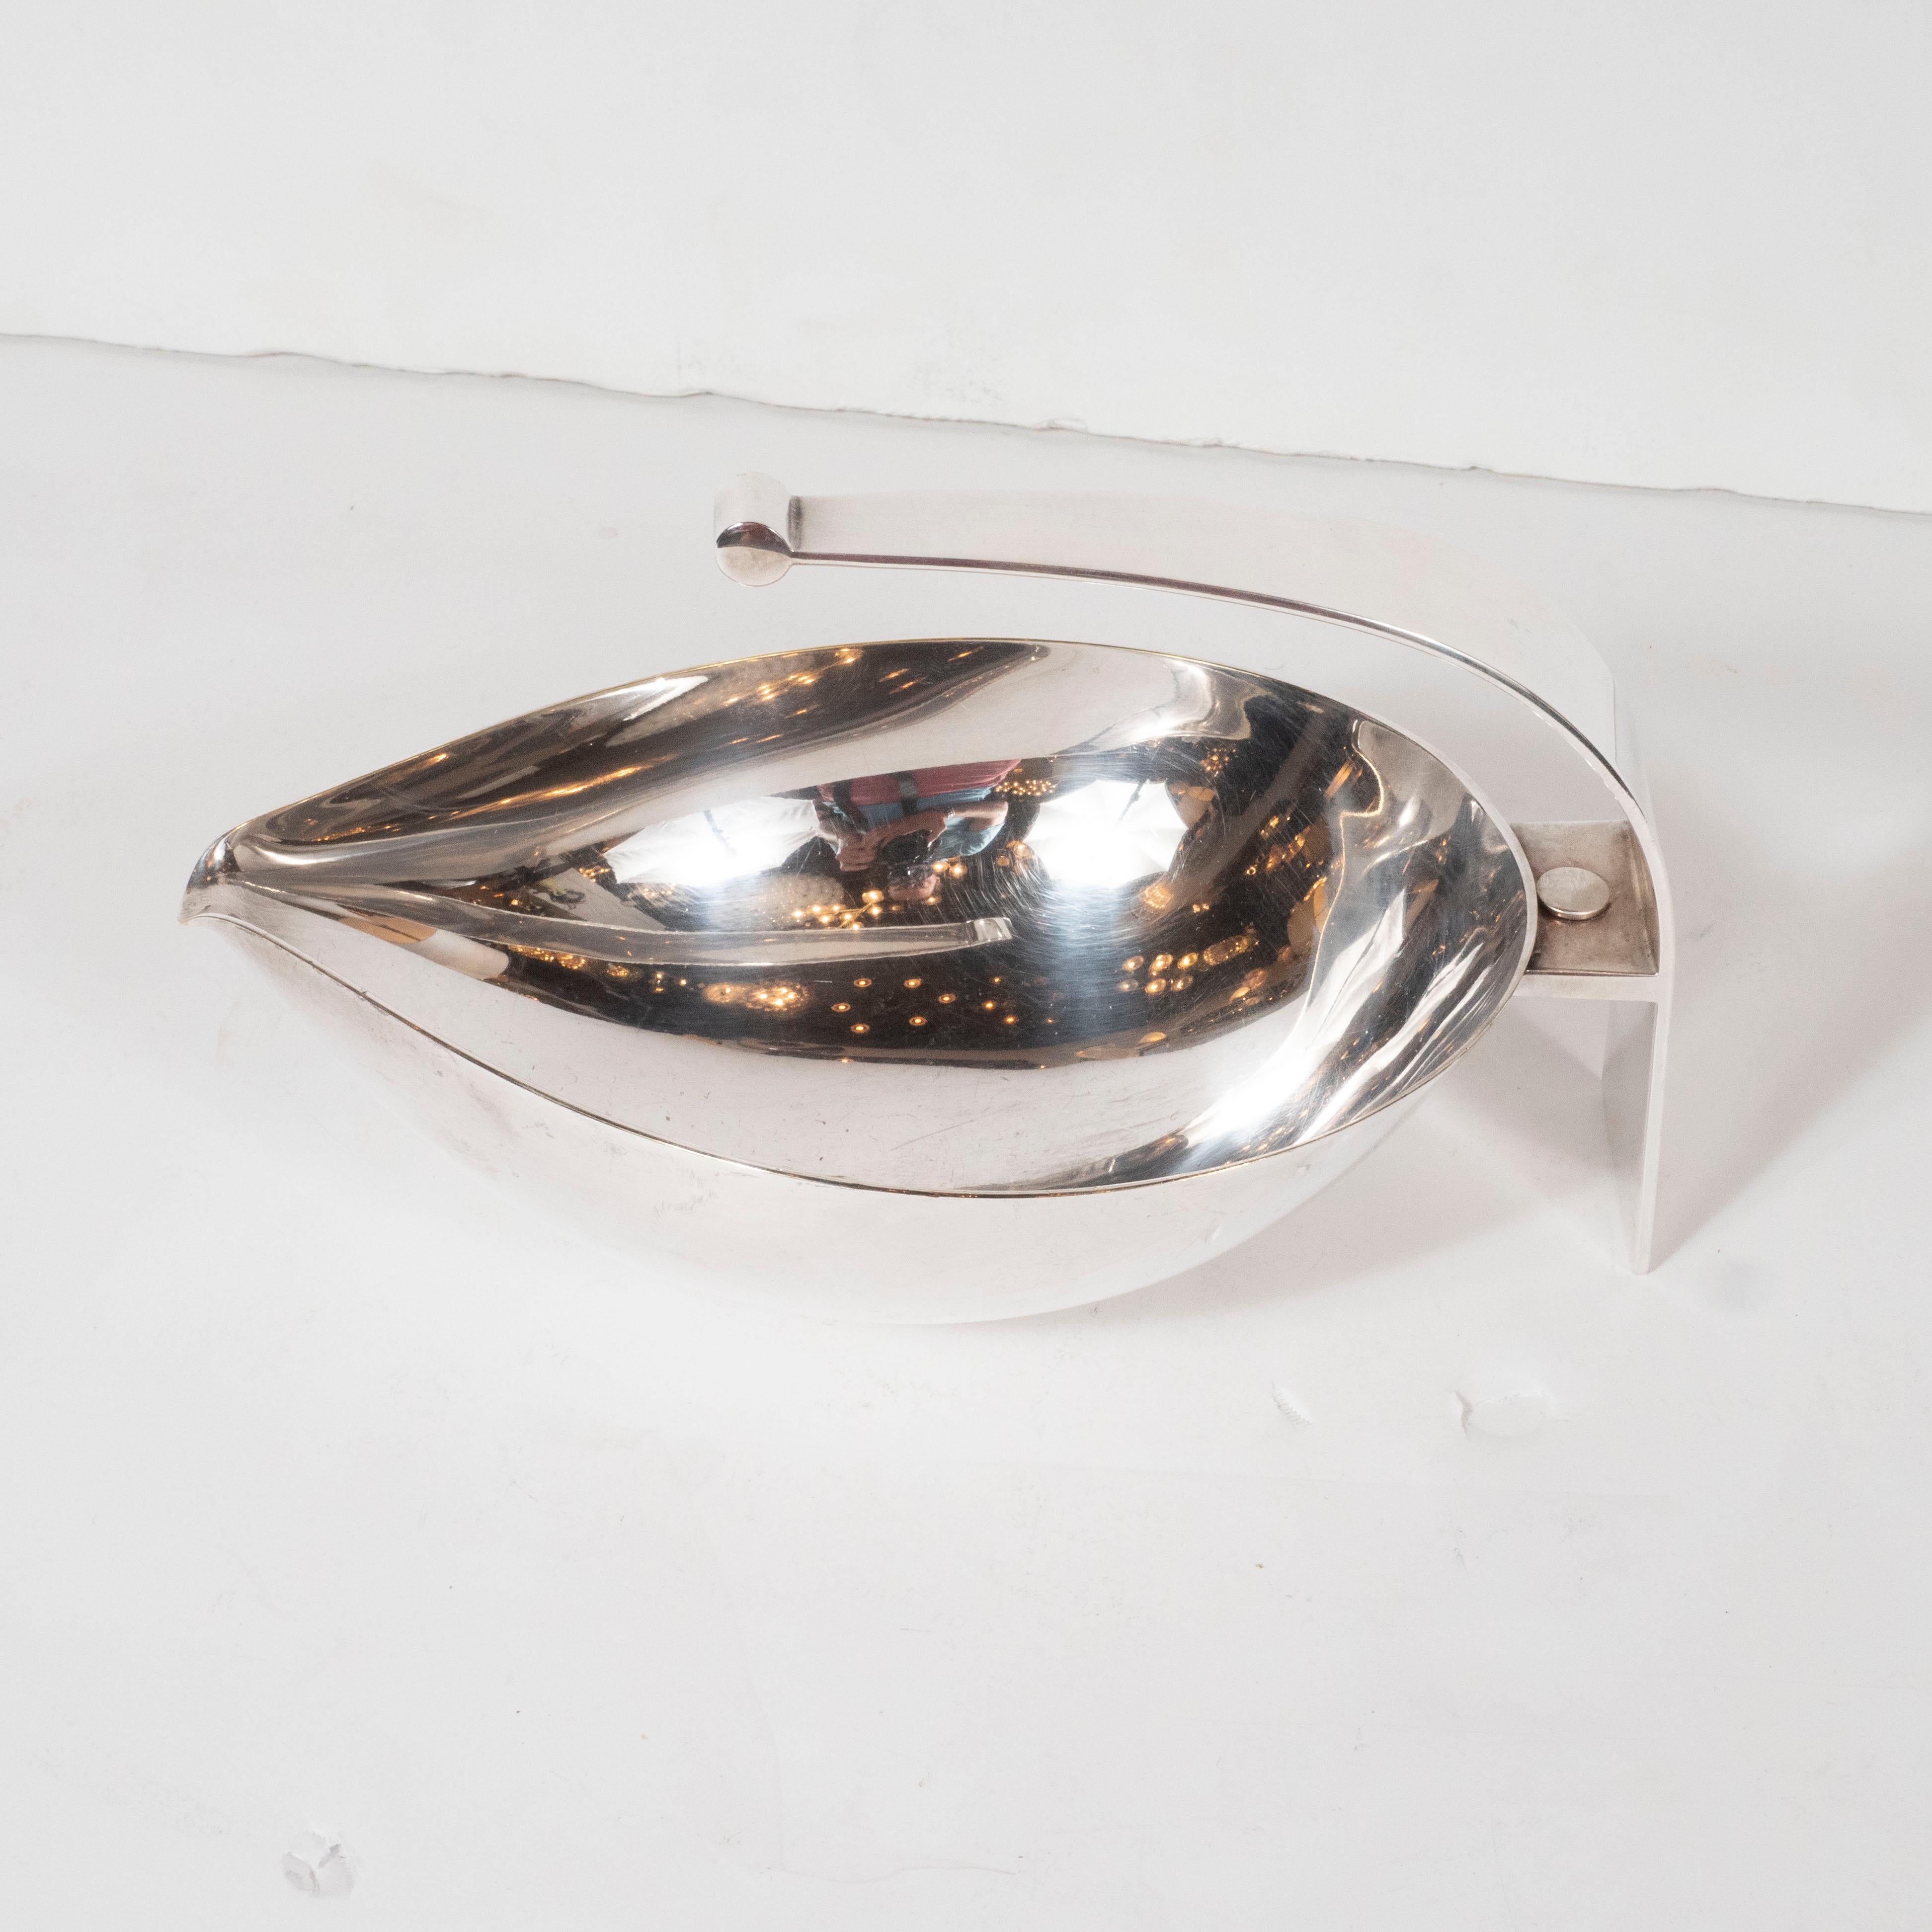 Silver Plate Italian Mid-Century Modern Cantilevered Silverplated Decorative Dish Signed Mesa